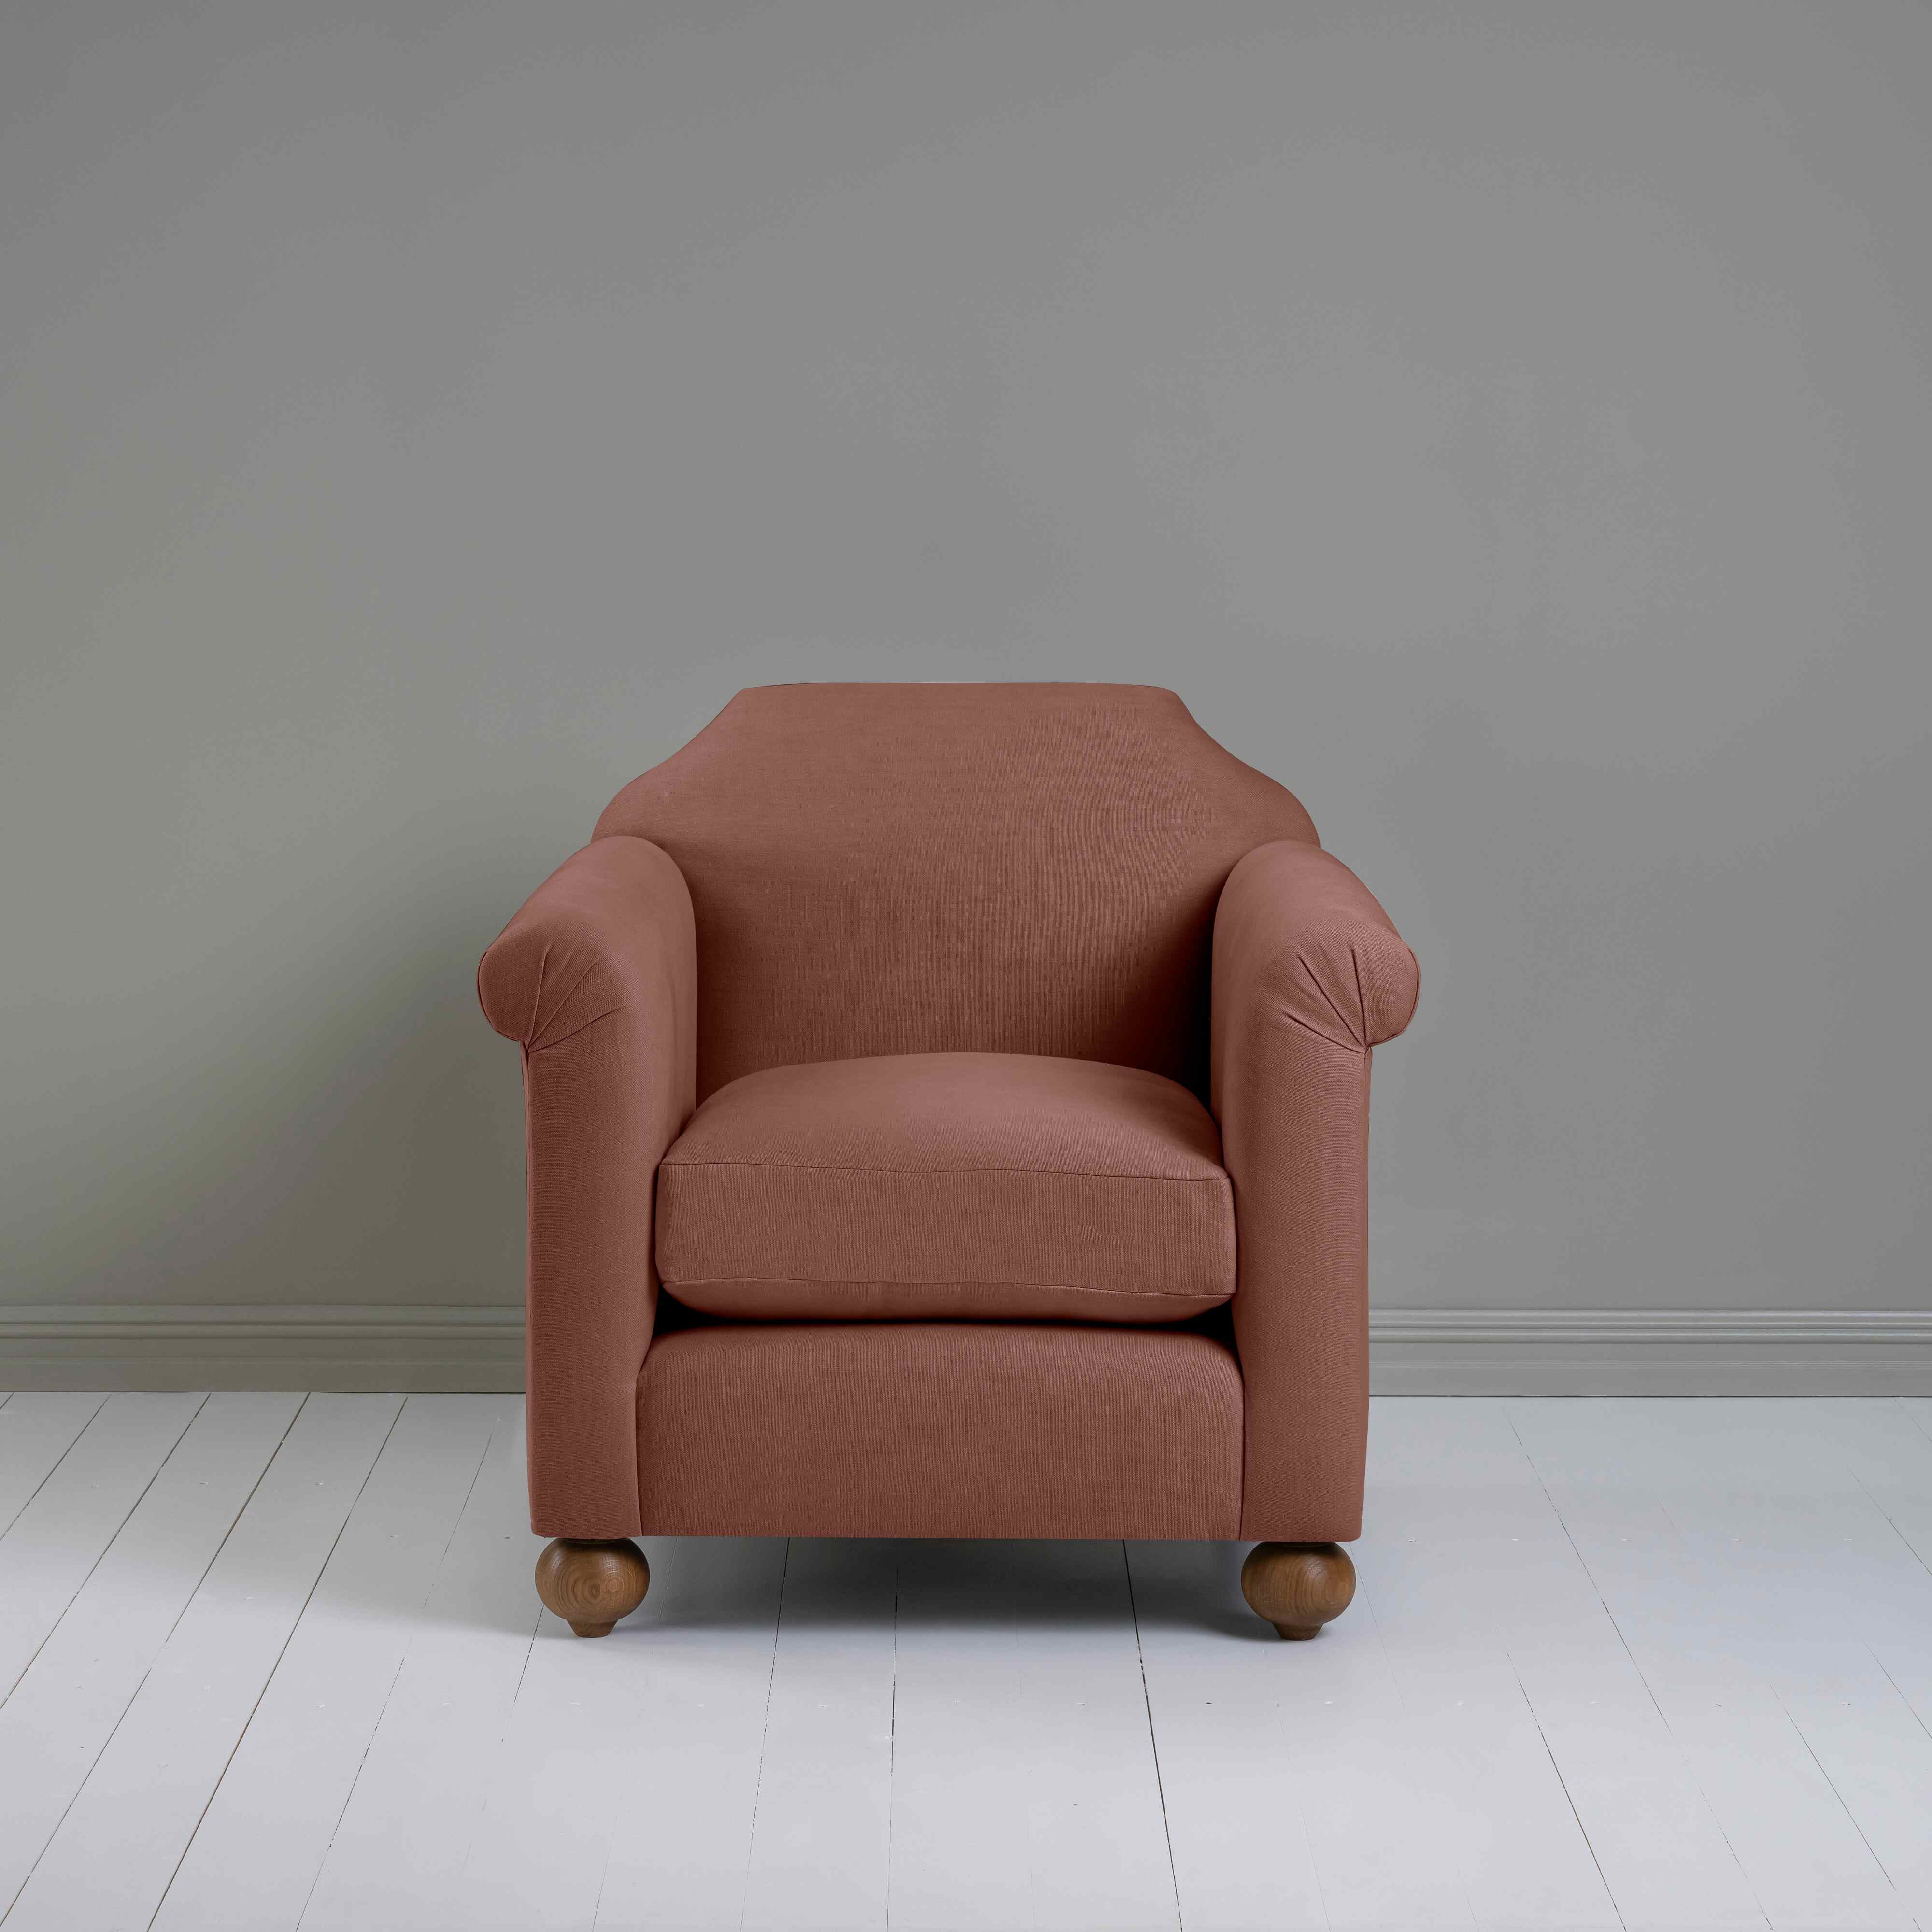  Dolittle Armchair in Laidback Linen Sweet Briar 